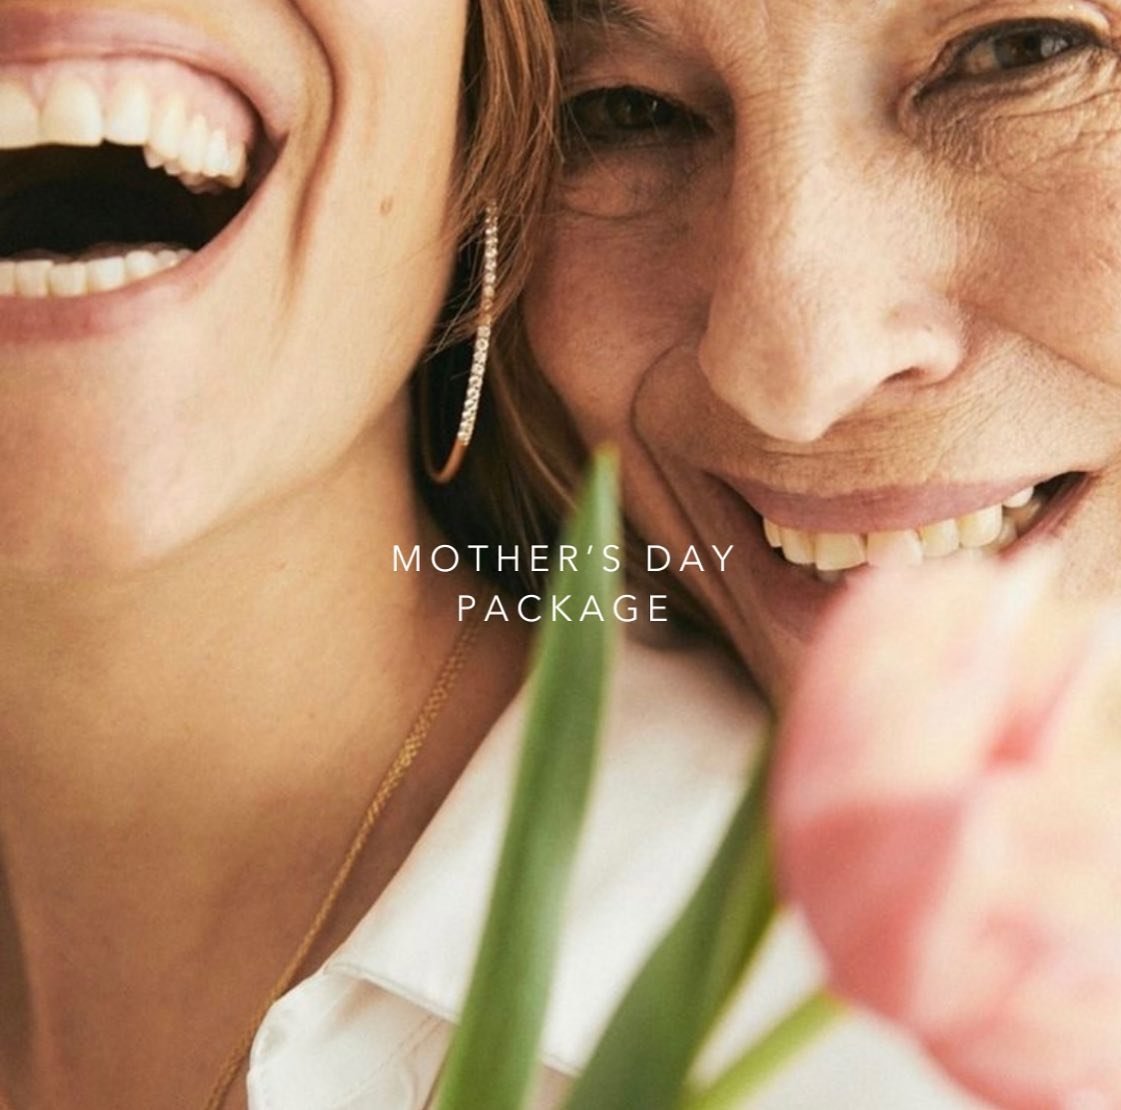 🌸 Celebrate Mother&rsquo;s Day with our pamper packages designed to make your mum feel truly special! 🌸

1. Deluxe package, which includes a luxurious one-hour Osmosis facial, a relaxing head &amp; scalp massage, and a professional eyebrow shape fo